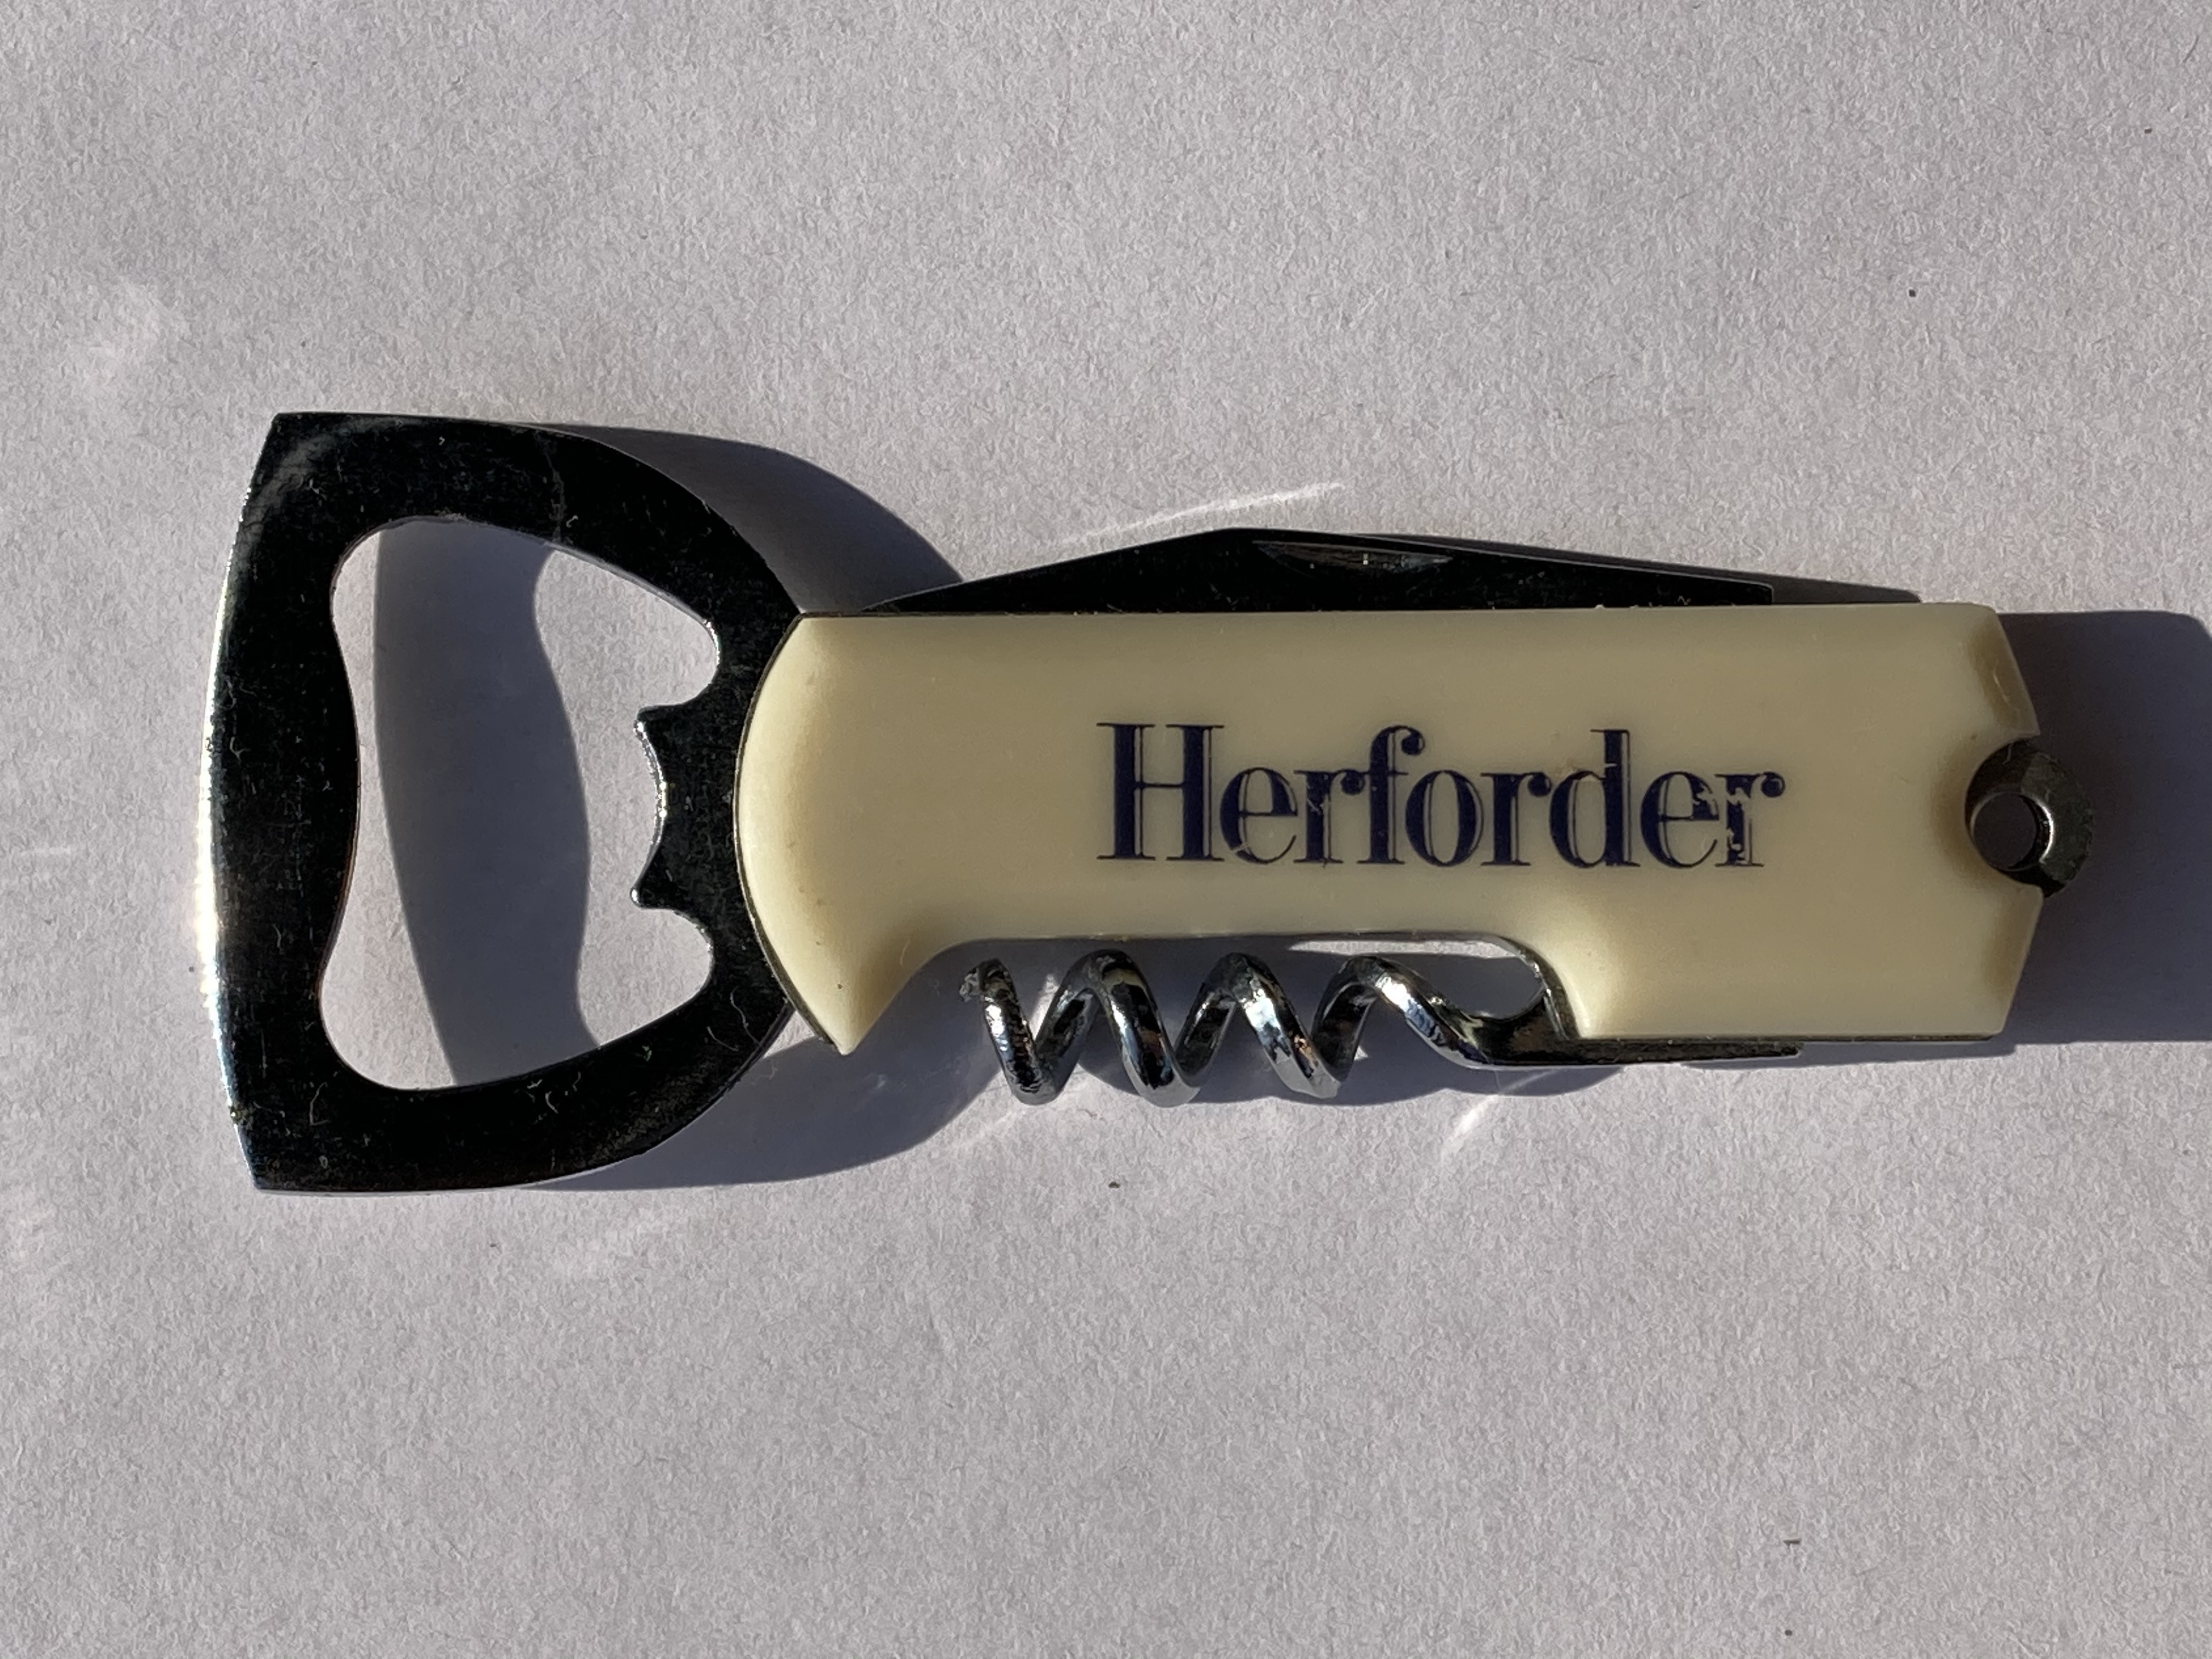 Herforder small multifunctional bottle opener with white rubber